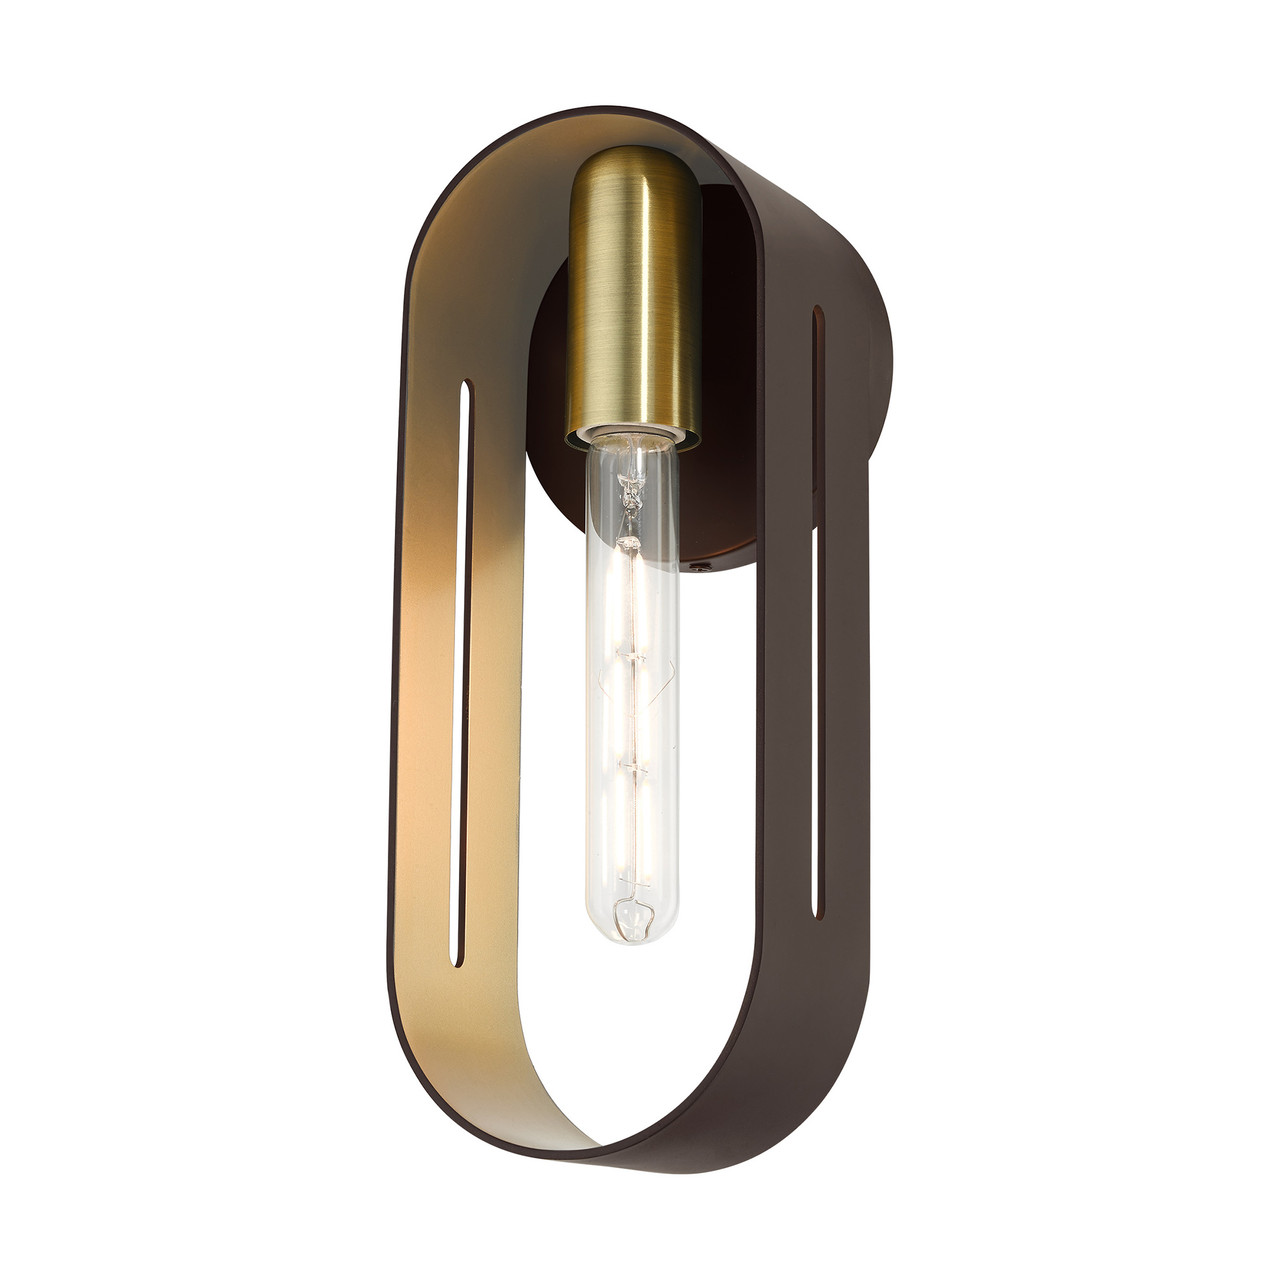 LIVEX LIGHTING 45762-07 1 Light Bronze with Antique Brass Accents ADA Single Sconce